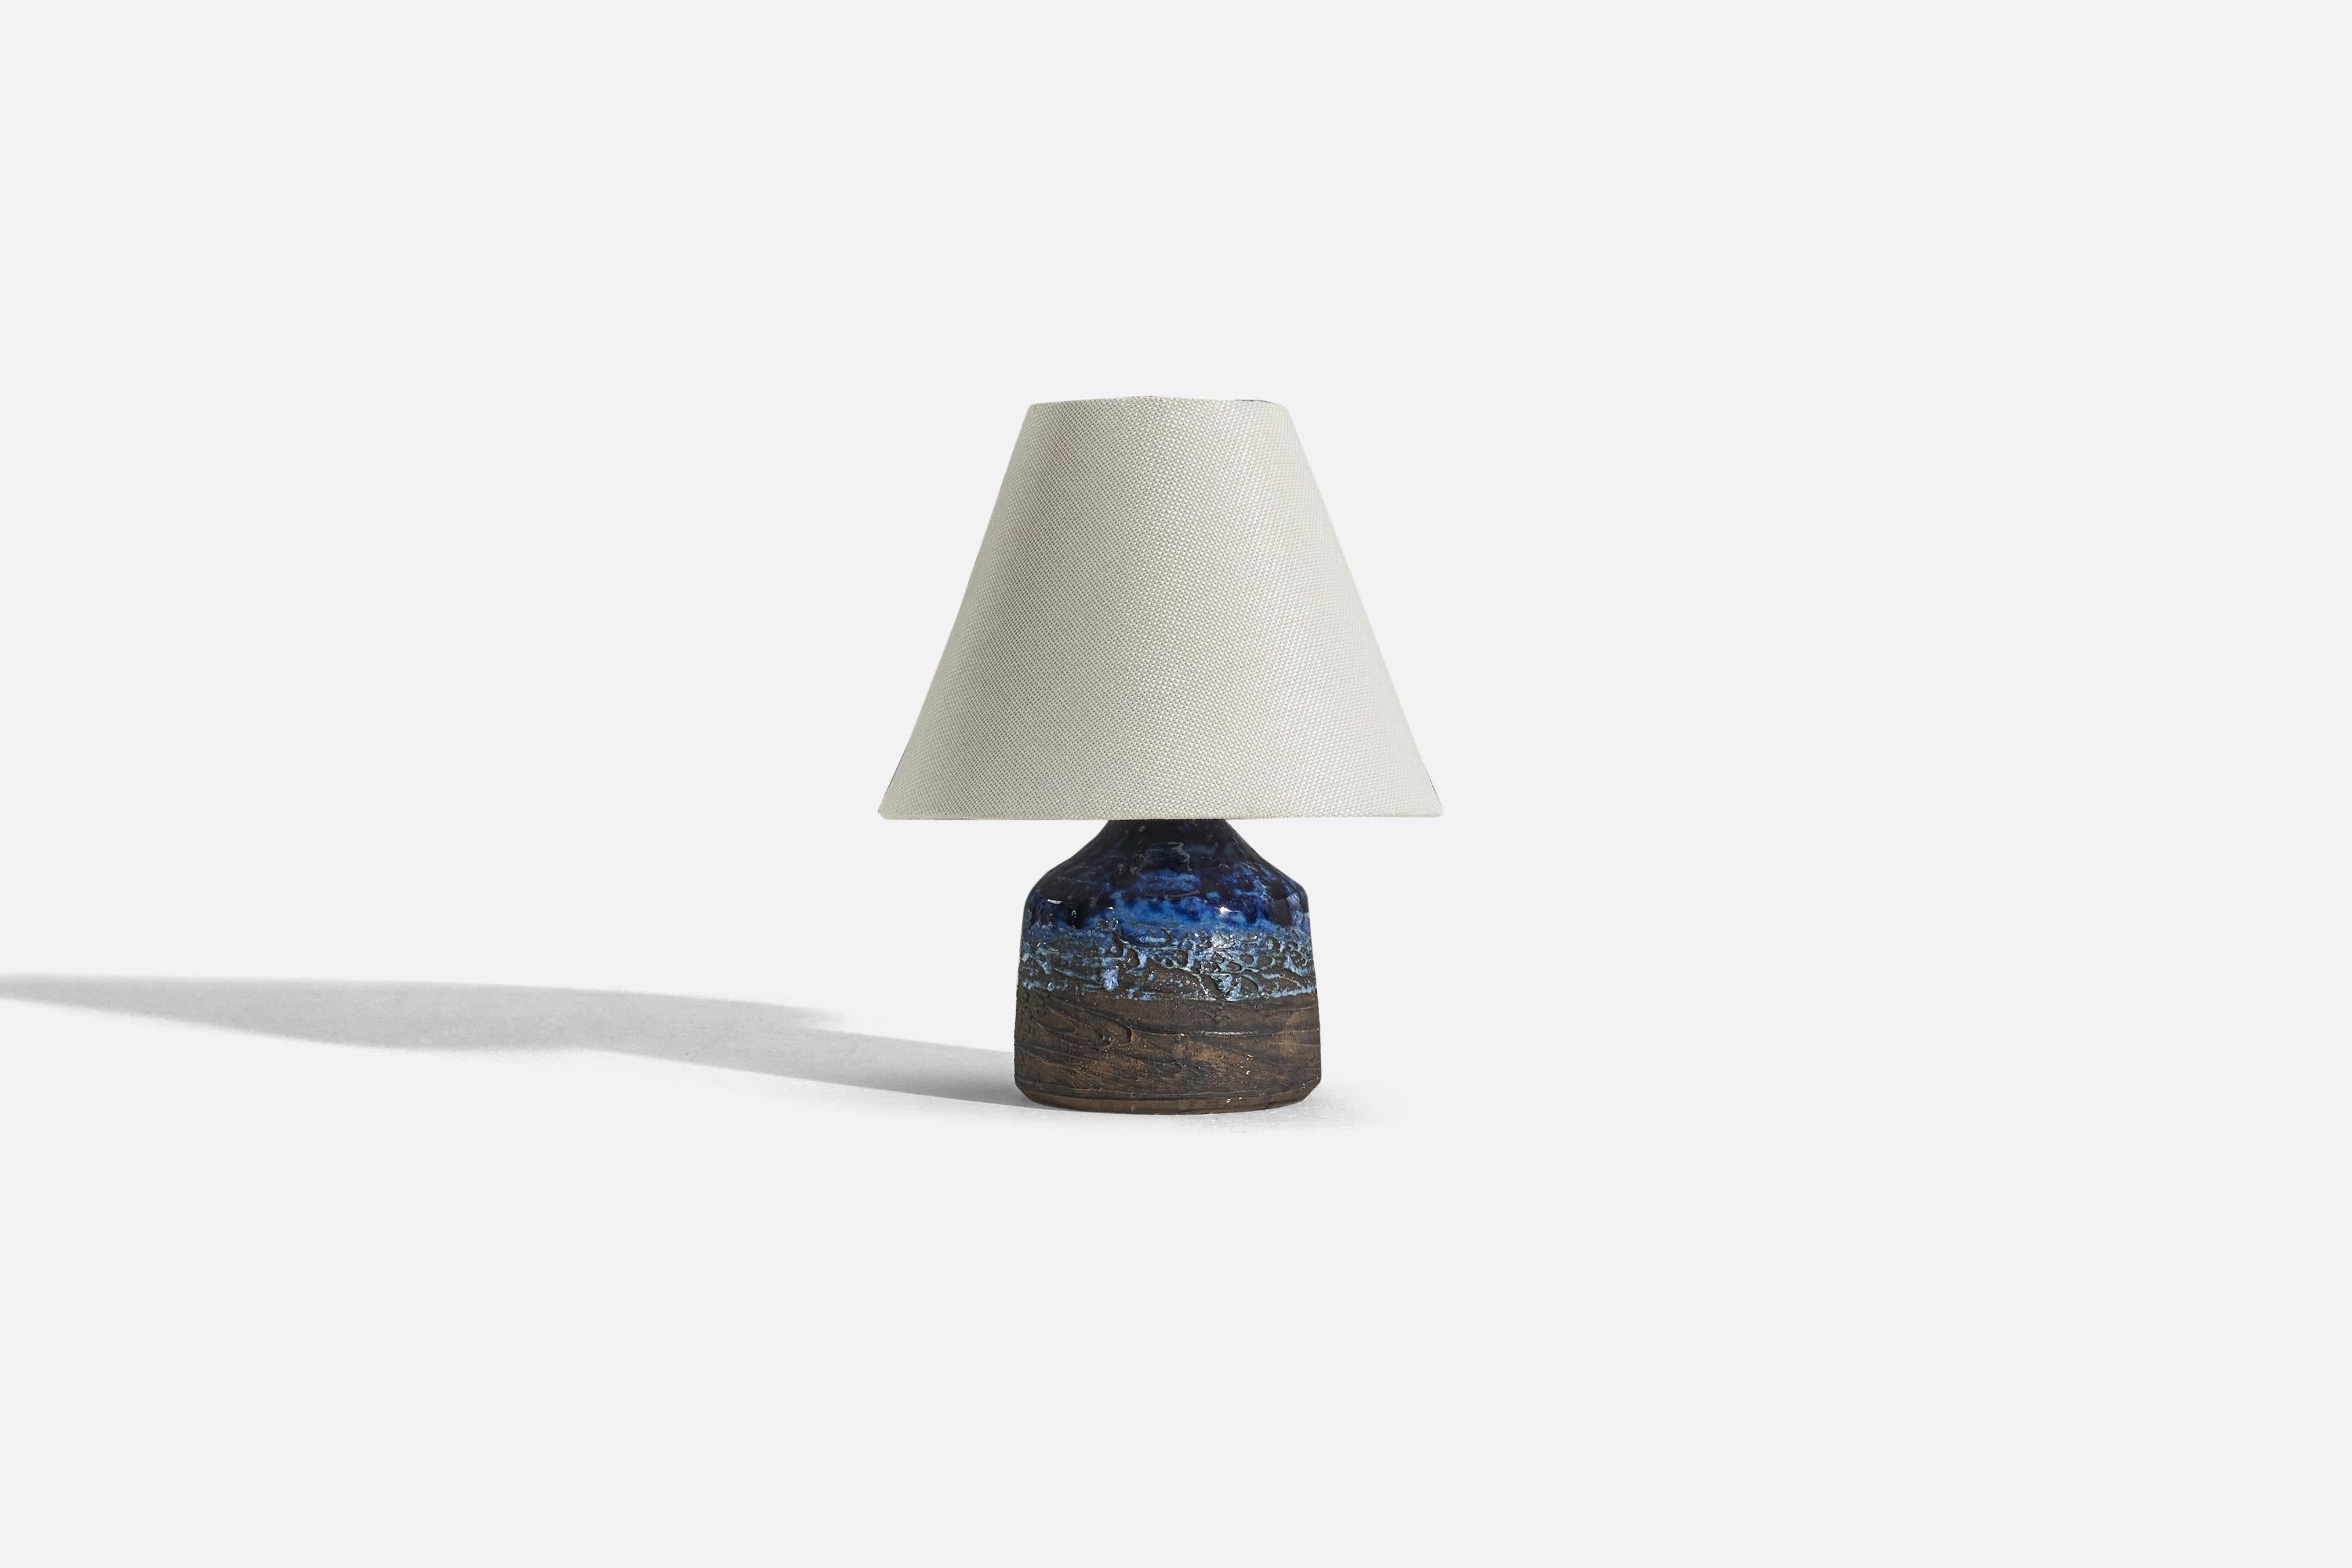 A brown and blue-glazed stoneware table lamp designed and produced by Tilgmans Keramik, Sweden, 1960s. 

Sold without lampshade. 
Dimensions of Lamp (inches) : 6.625 x 4.375 x 4.375 (H x W x D)
Dimensions of Shade (inches) : 3.75 x 8 x 6.25 (T x